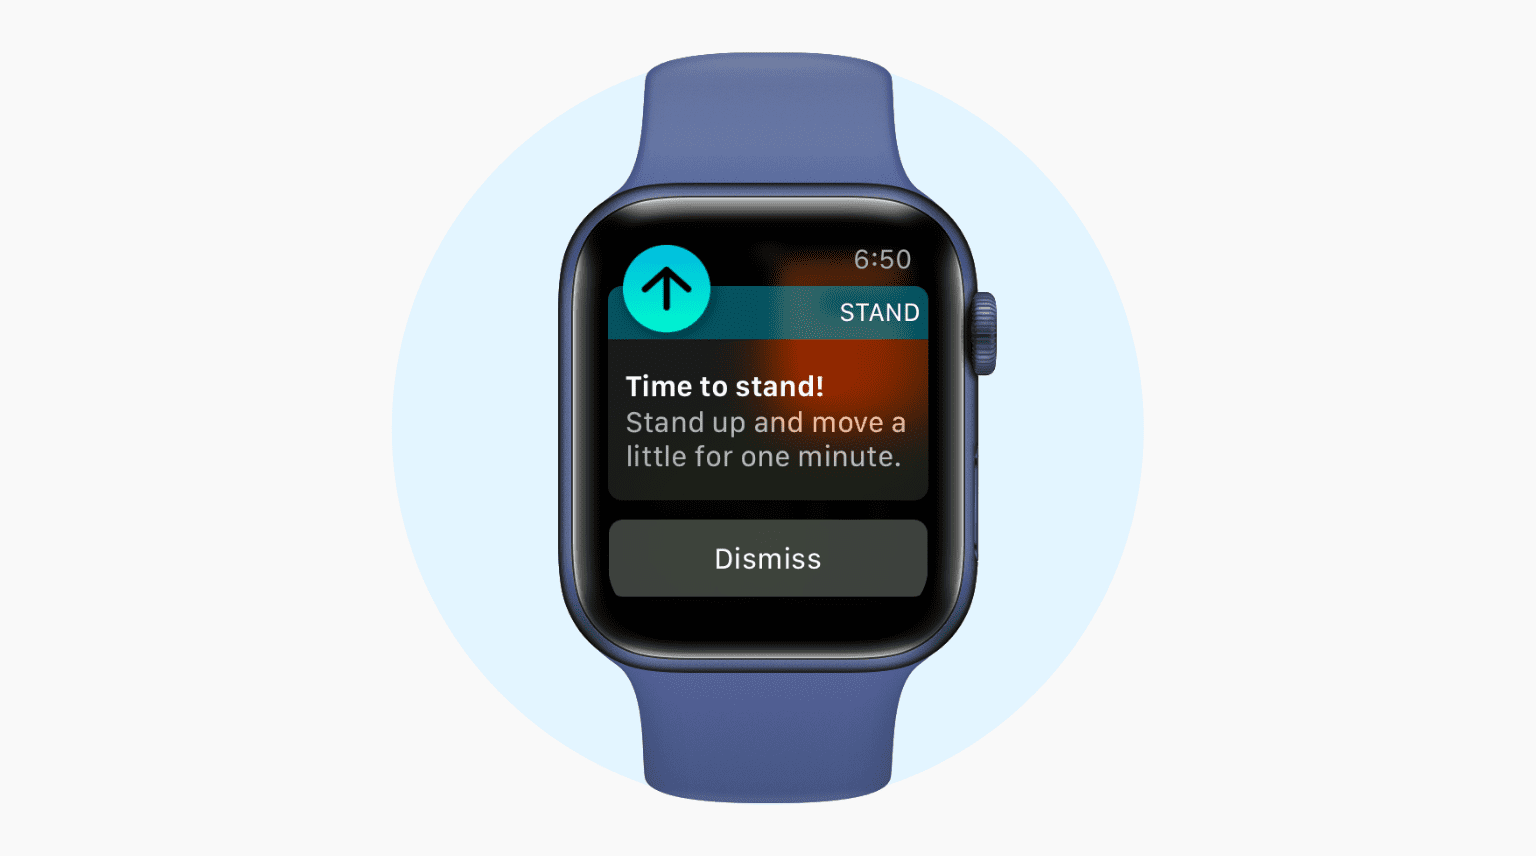 Time to stand Apple Watch notification